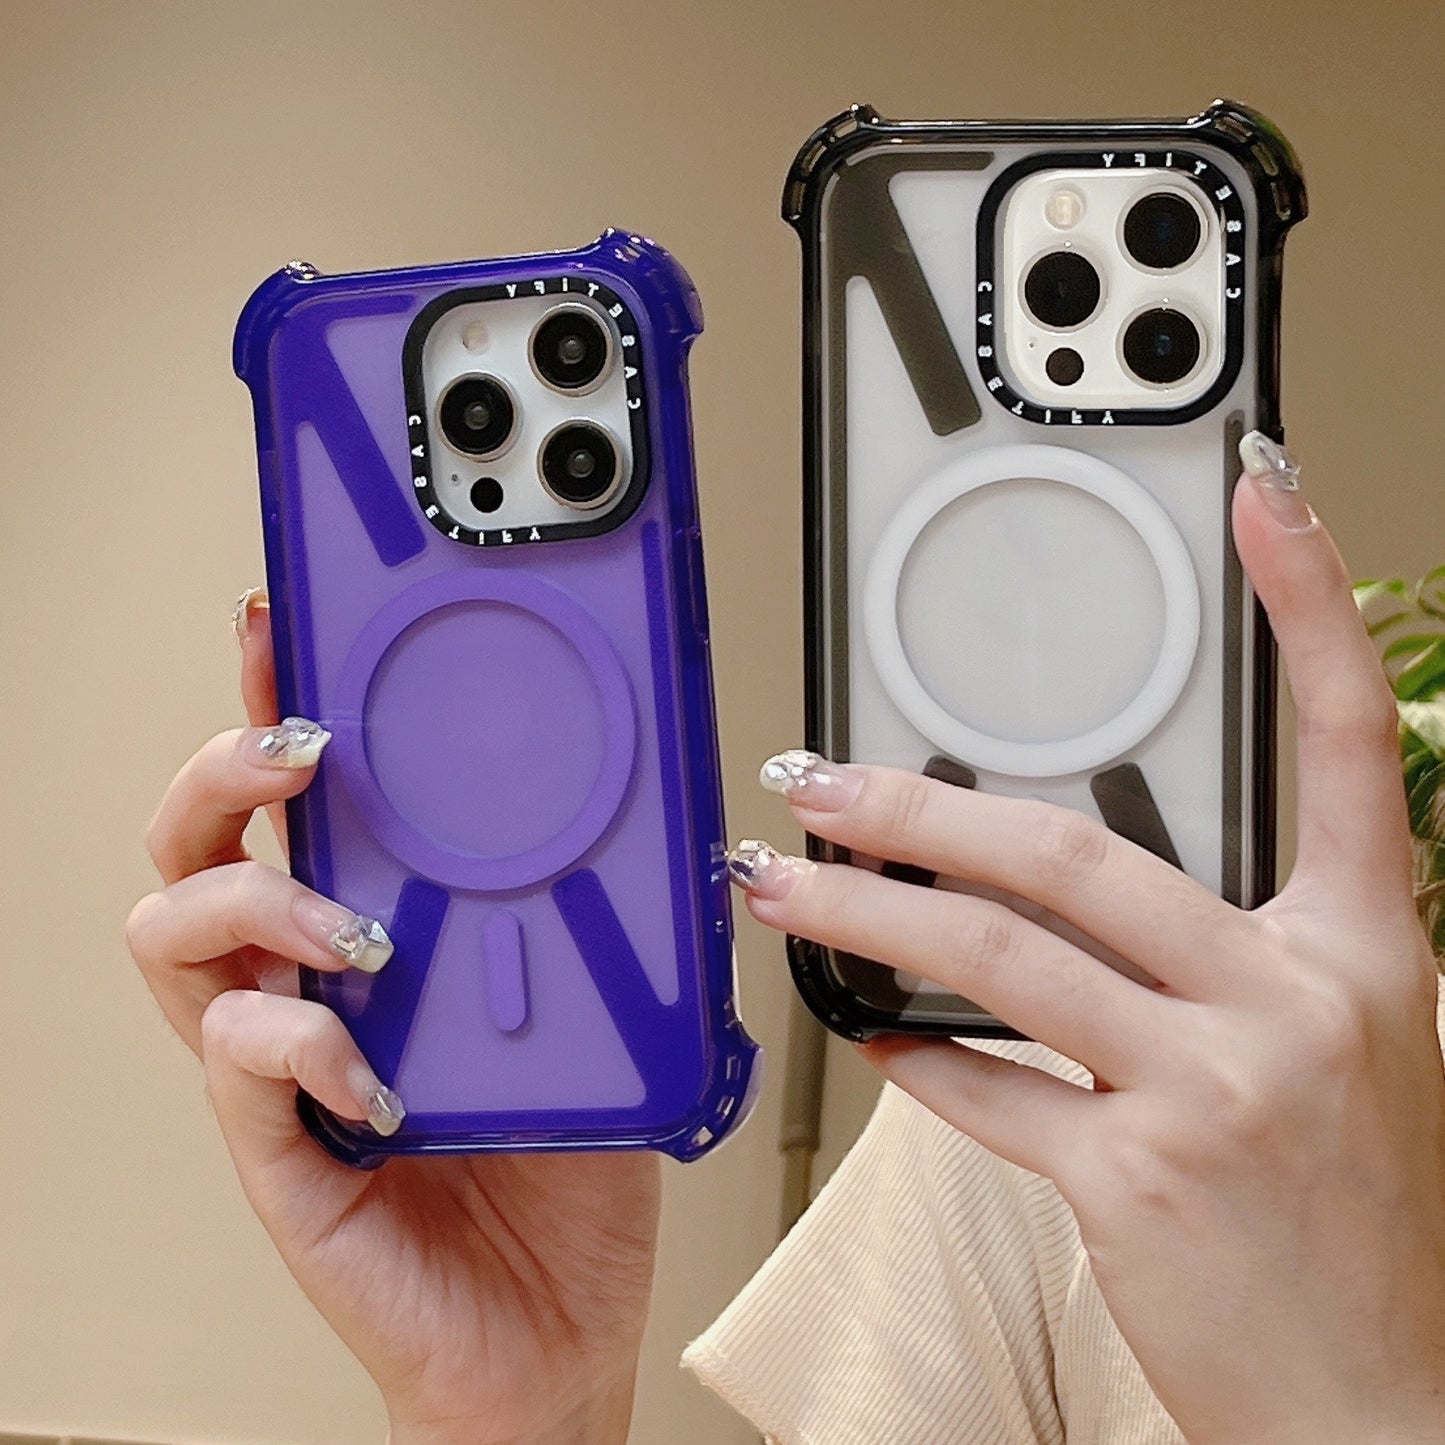 The new iPhone Case four-color